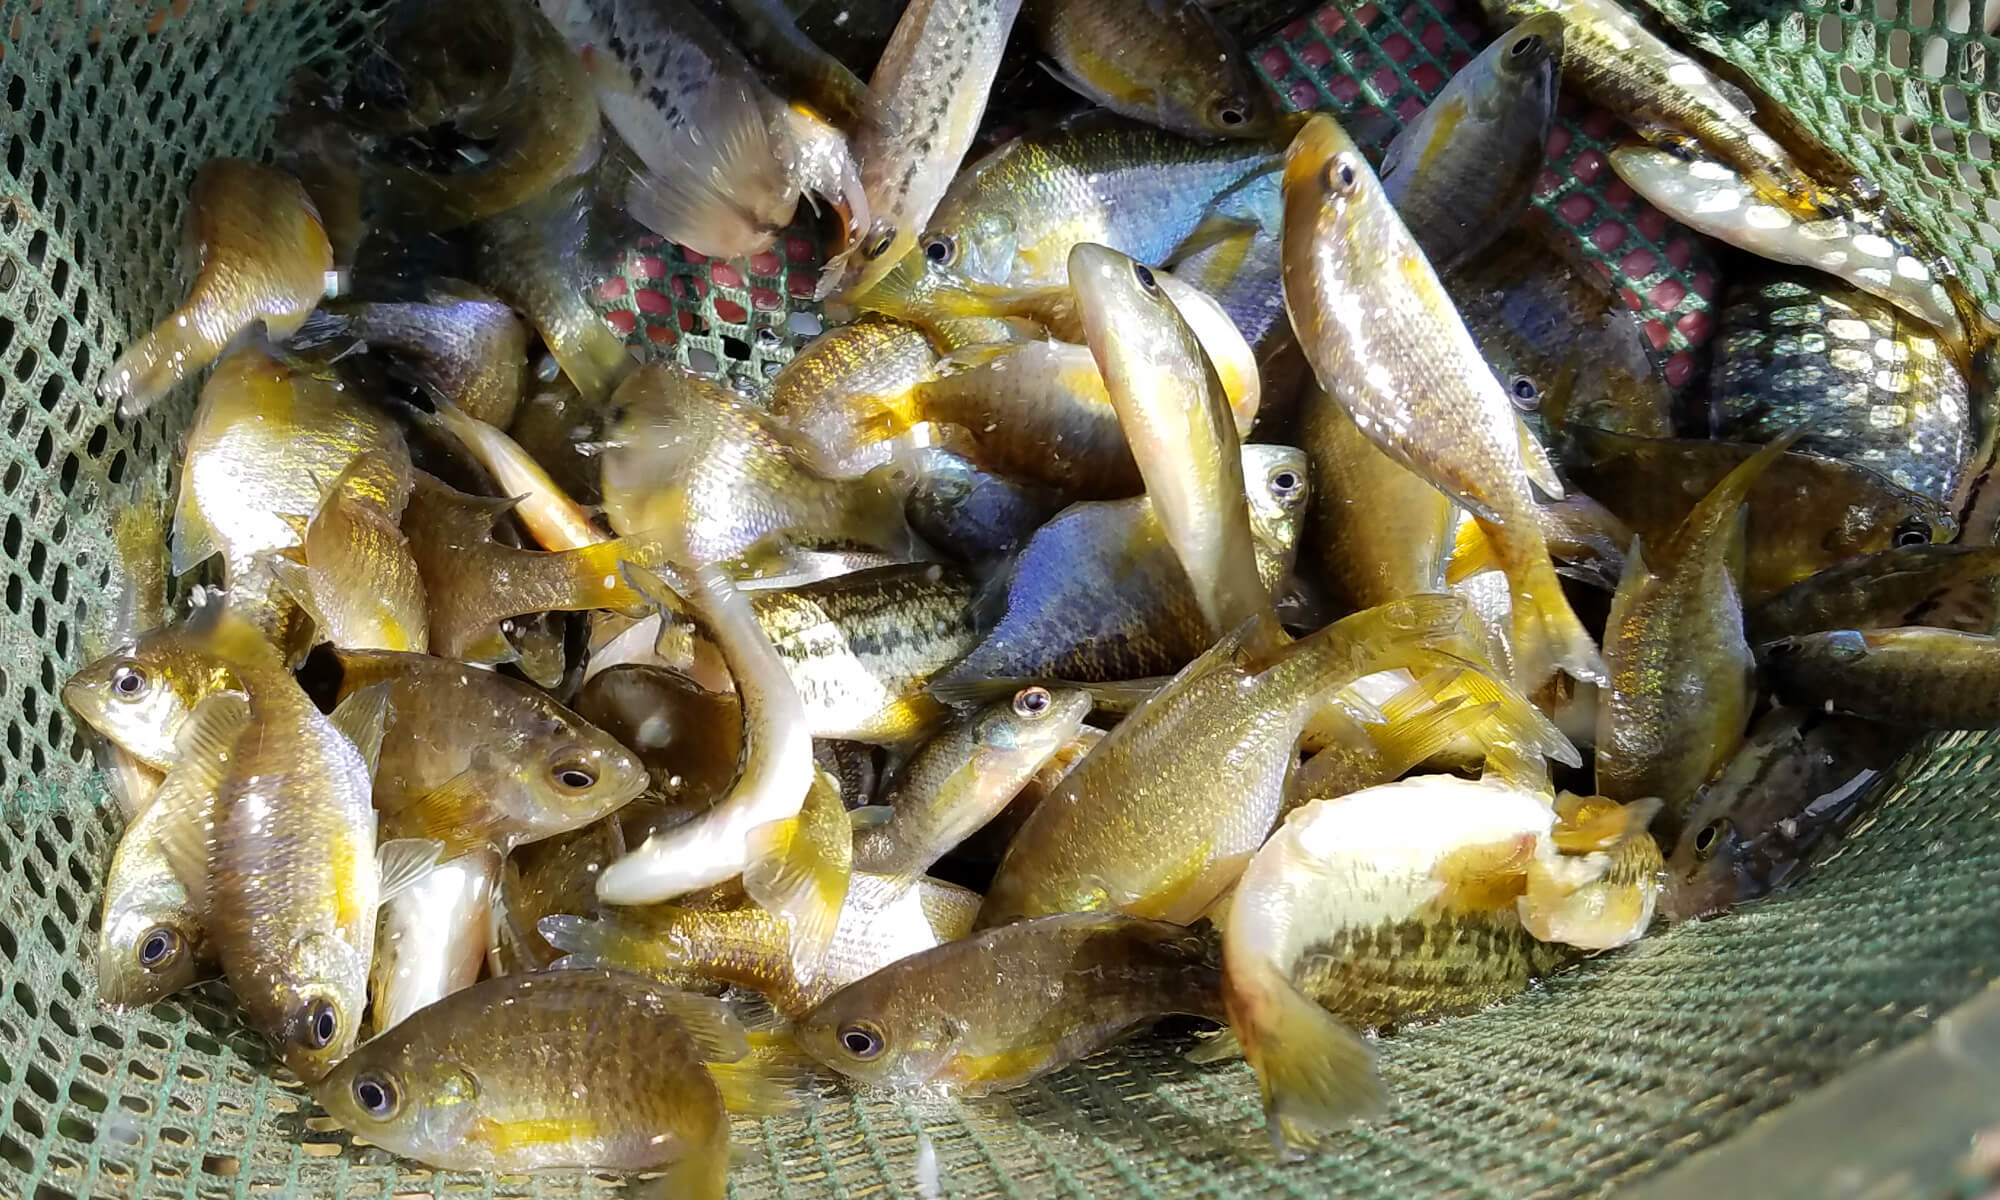 Bass and Bluegills for stocking